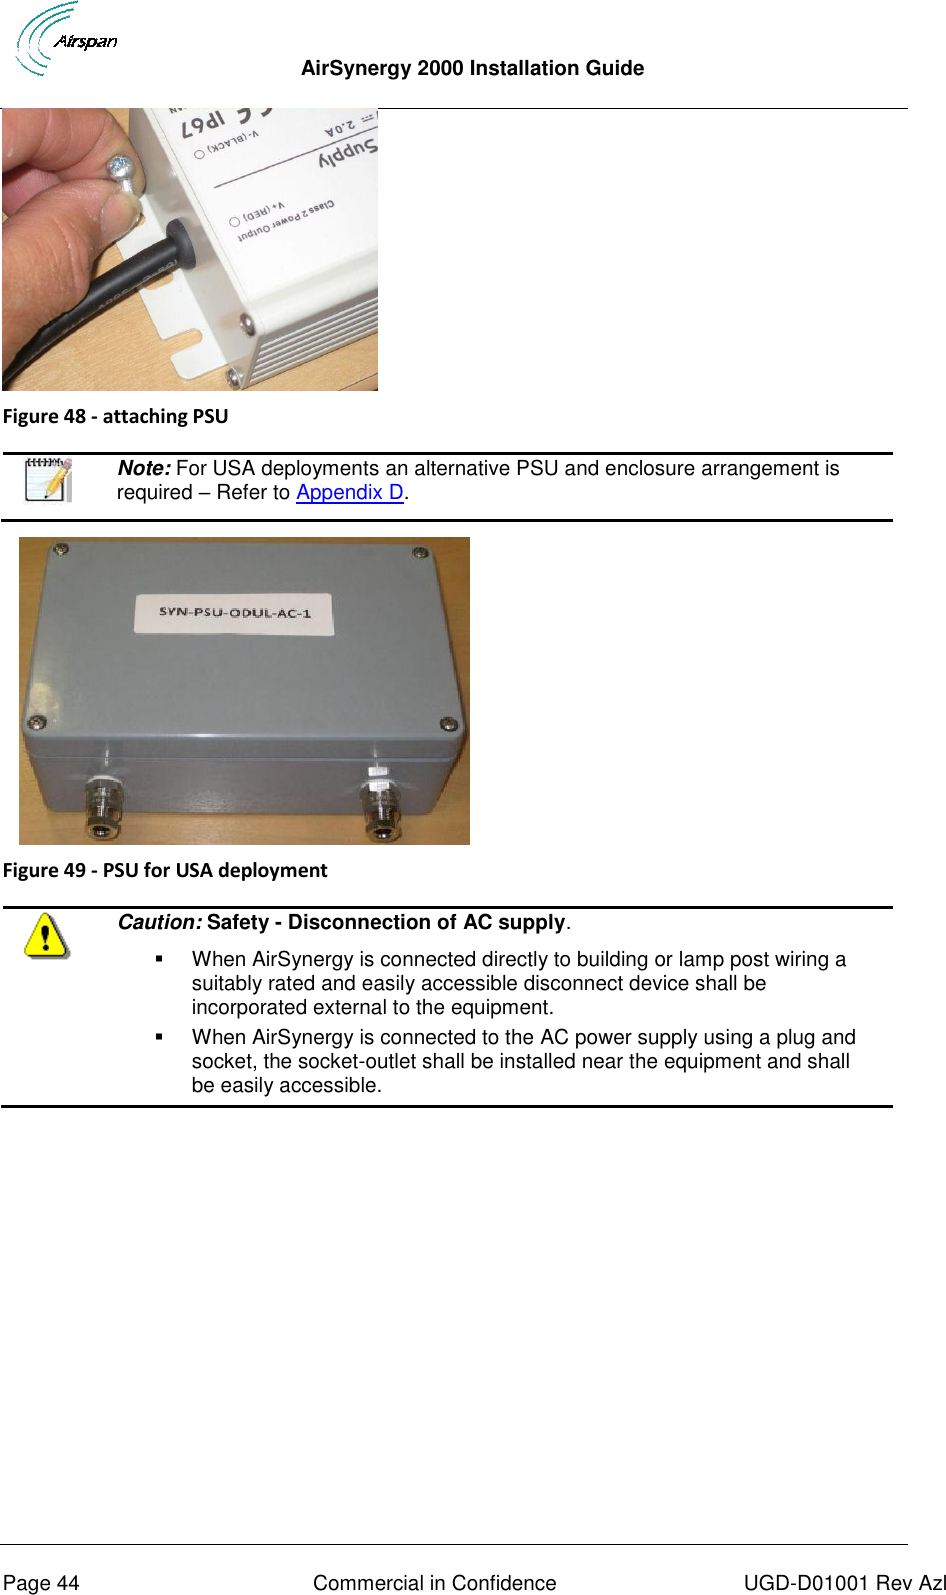  AirSynergy 2000 Installation Guide     Page 44  Commercial in Confidence  UGD-D01001 Rev Azl  Figure 48 - attaching PSU    Note: For USA deployments an alternative PSU and enclosure arrangement is required – Refer to Appendix D.        Figure 49 - PSU for USA deployment   Caution: Safety - Disconnection of AC supply.   When AirSynergy is connected directly to building or lamp post wiring a suitably rated and easily accessible disconnect device shall be incorporated external to the equipment.    When AirSynergy is connected to the AC power supply using a plug and socket, the socket-outlet shall be installed near the equipment and shall be easily accessible.   